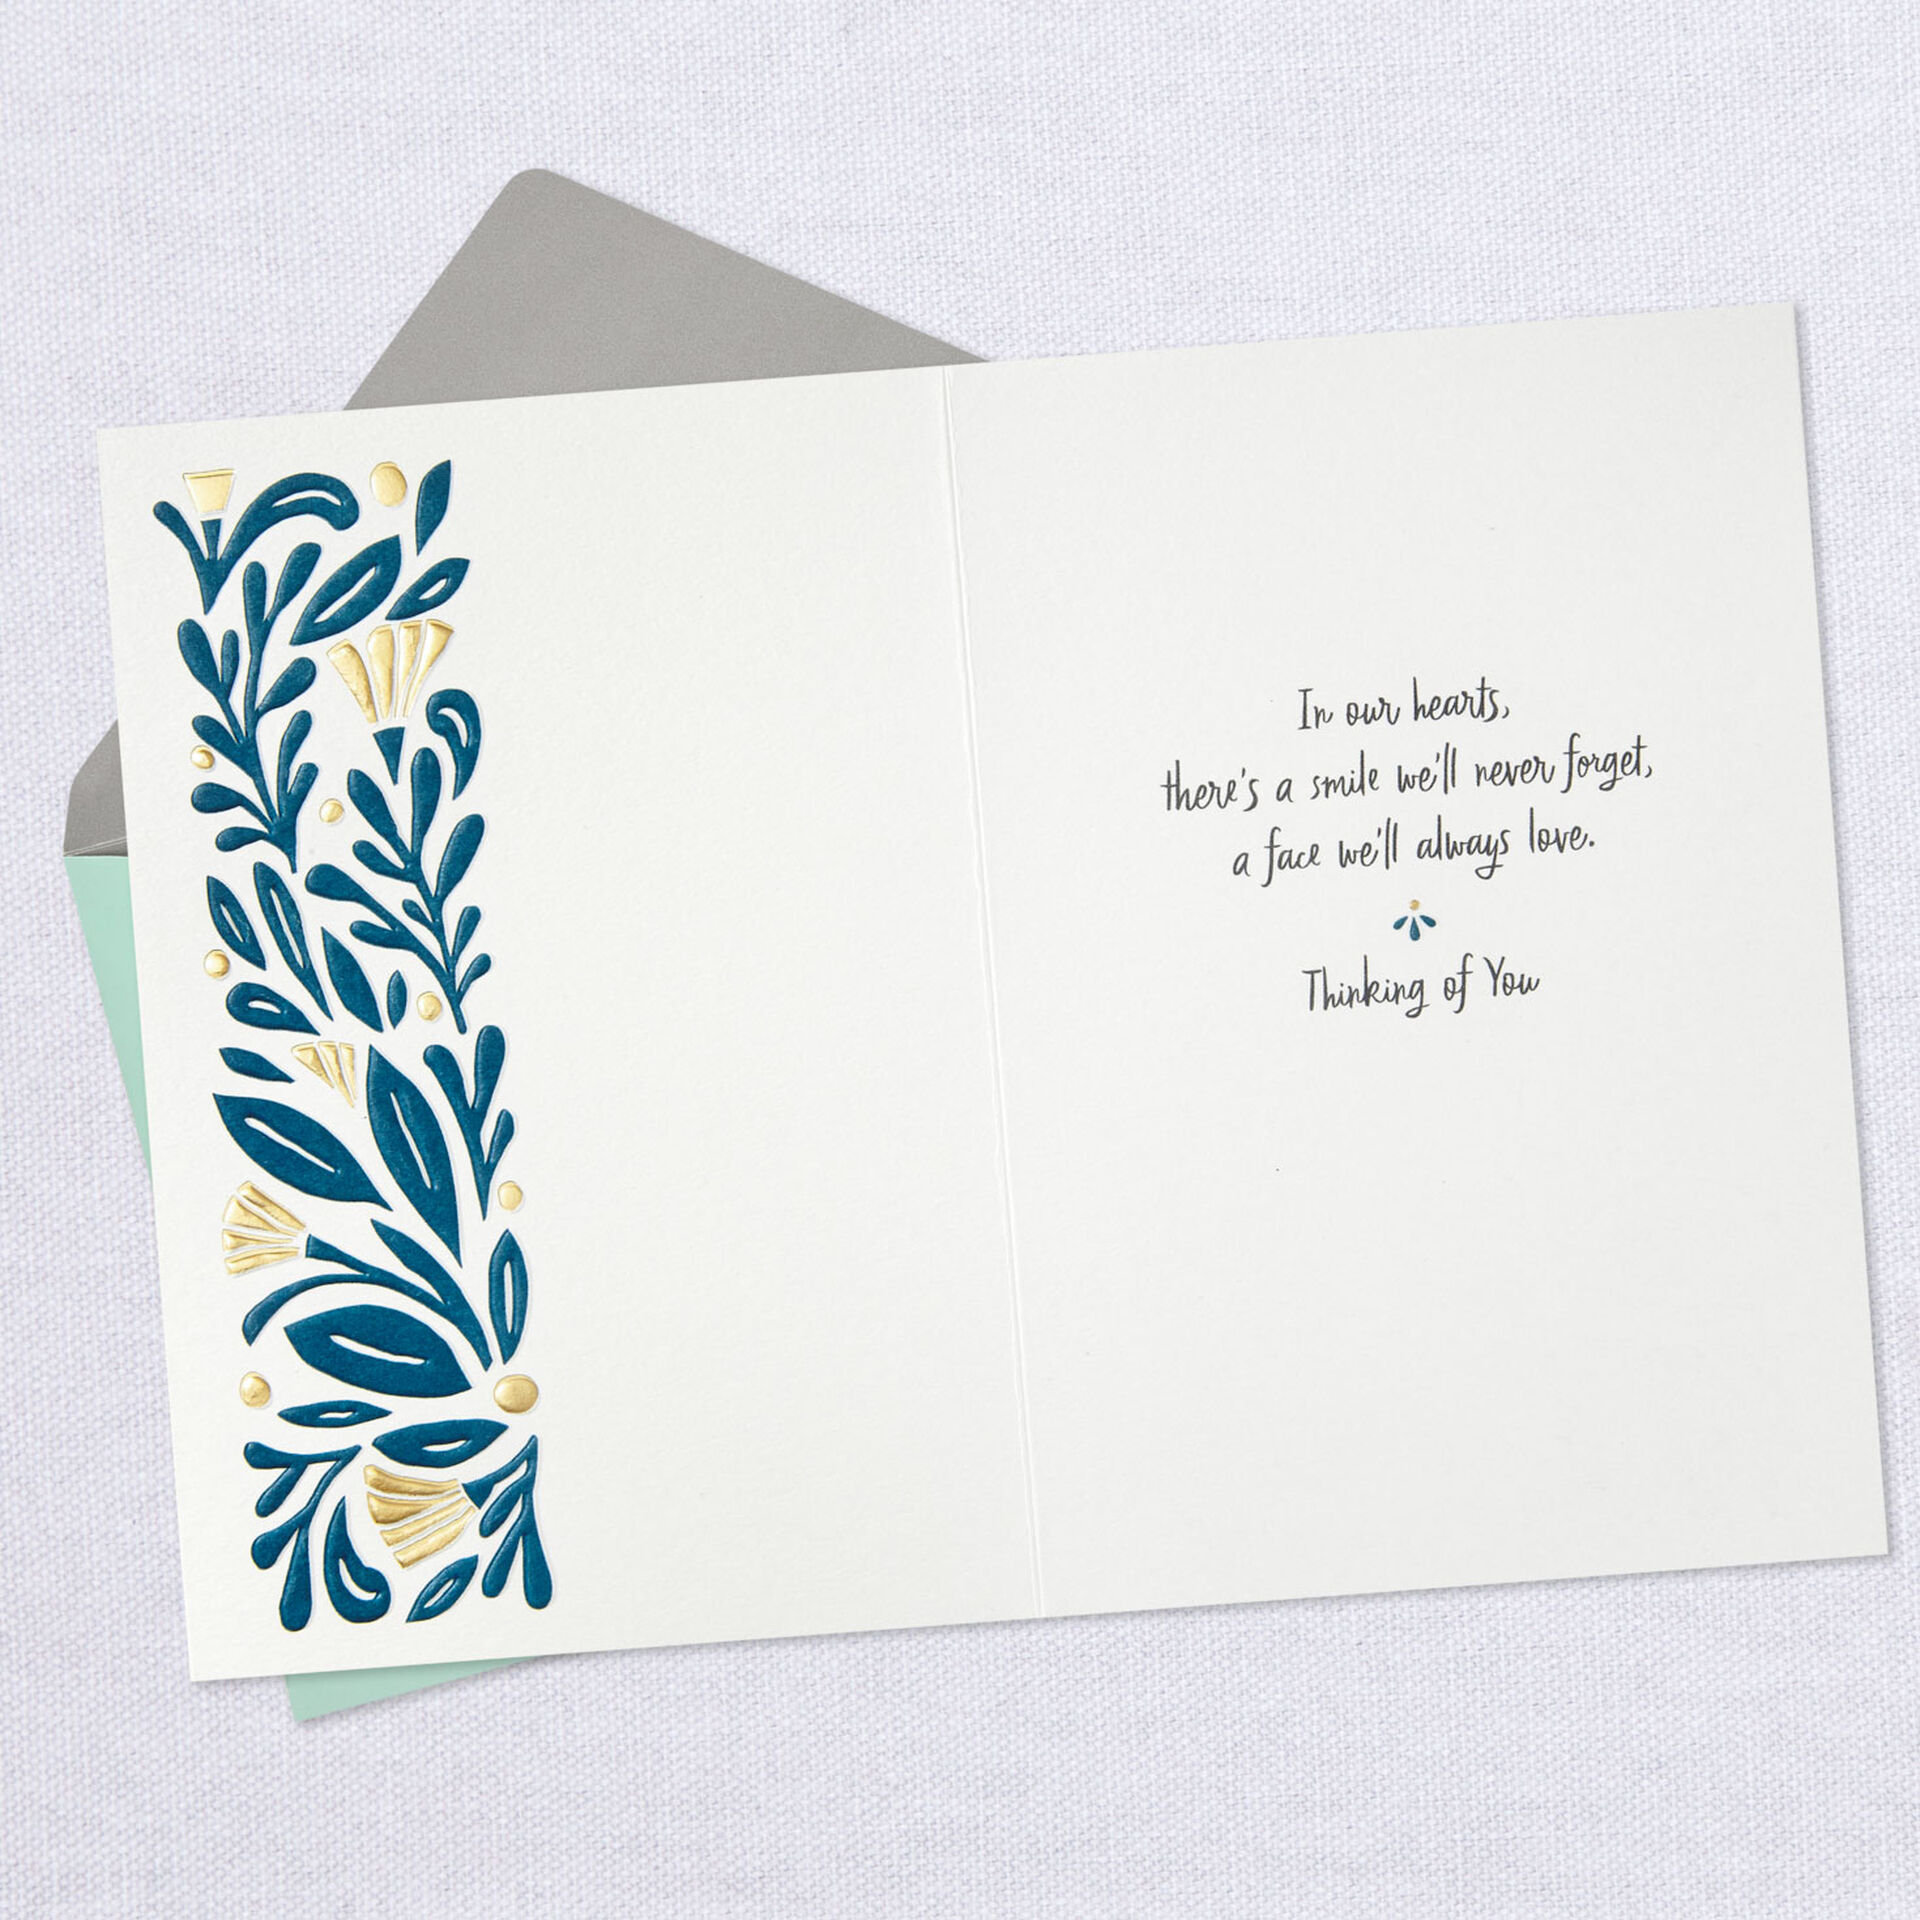 Hearts-and-Vines-Sympathy-Card_399S2690_03